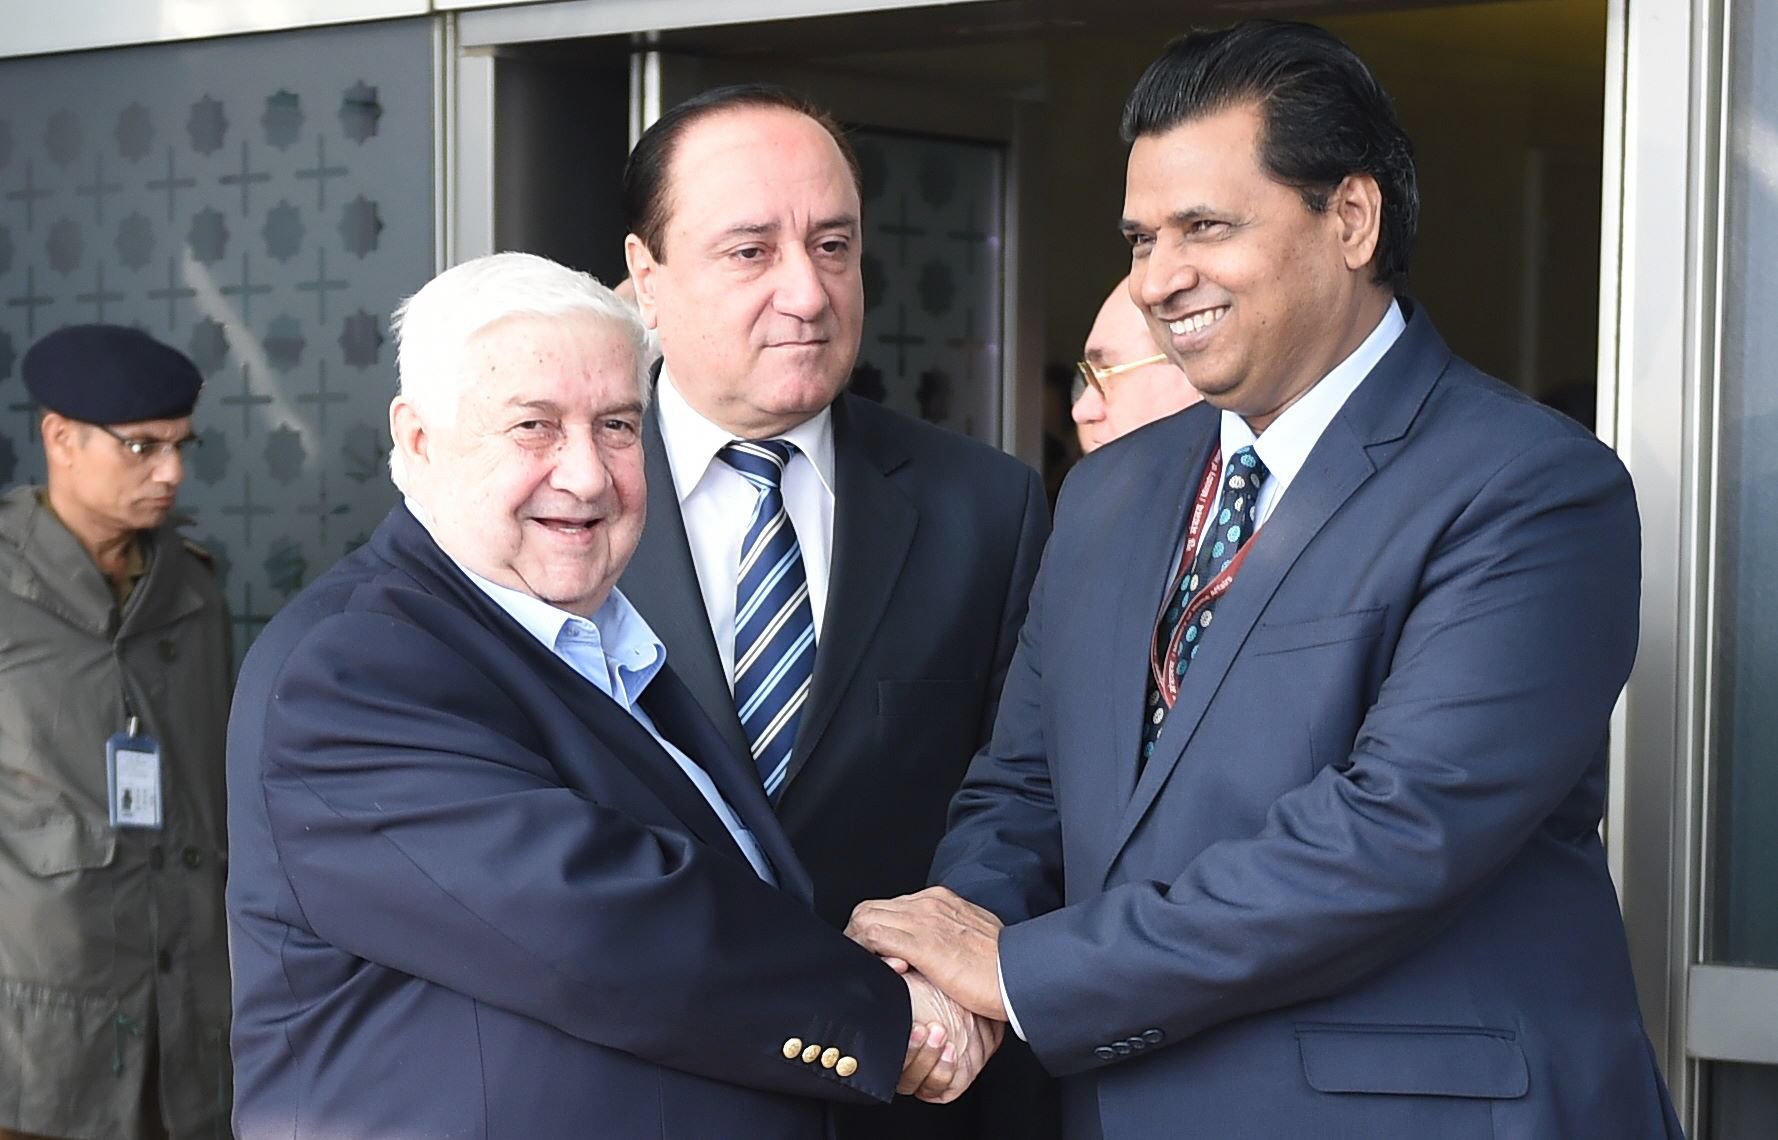 syrian deputy prime minister and minister of foreign affairs walid al moualem l shakes hand with joint secretary satbir singh r upon his arrival at the indira gandhi international airport in the indian capital new delhi on january 11 2016 moualem is on an official visit to india photo afp